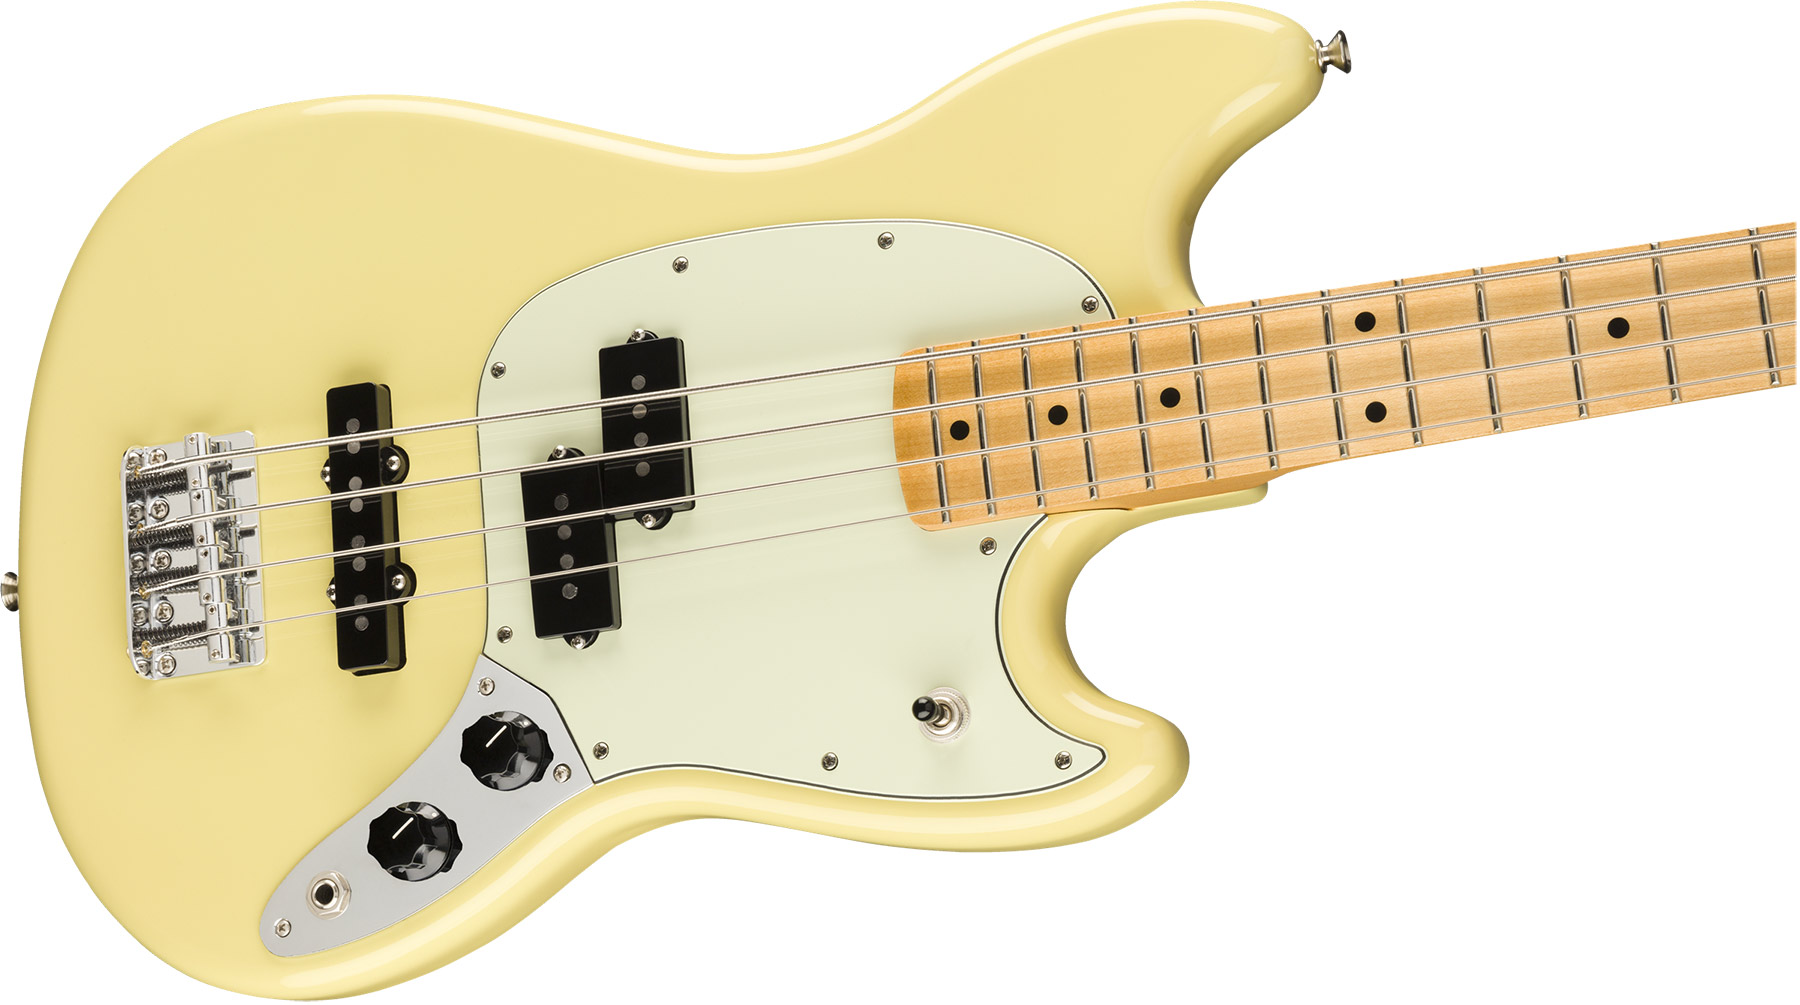 Fender Player Mustang Bass Pj Ltd Mex Mn - Canary - Solid body electric bass - Variation 2